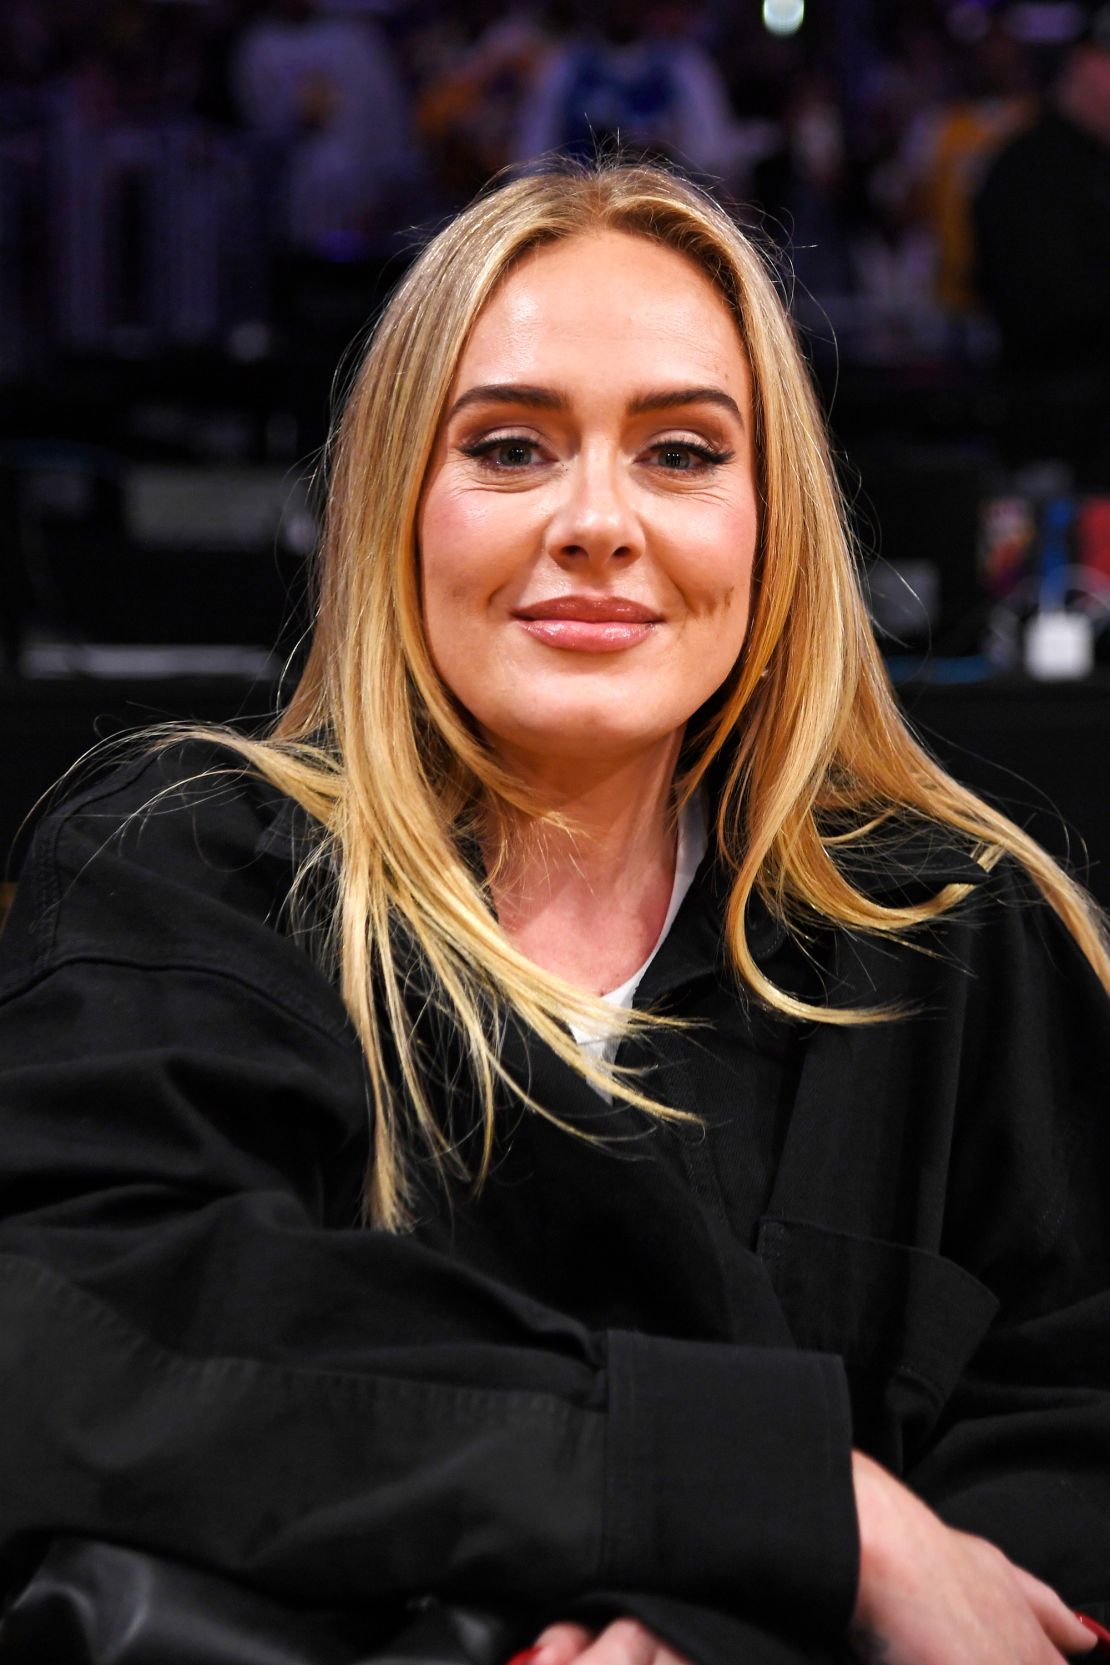 LOS ANGELES, CALIFORNIA - MAY 20: Adele attends game three of the Western Conference Finals between the Los Angeles Lakers and the Denver Nuggets at Crypto.com Arena on May 20, 2023 in Los Angeles, California. NOTE TO USER: User expressly acknowledges and agrees that, by downloading and or using this photograph, User is consenting to the terms and conditions of the Getty Images License Agreement. (Photo by Kevork Djansezian/Getty Images)